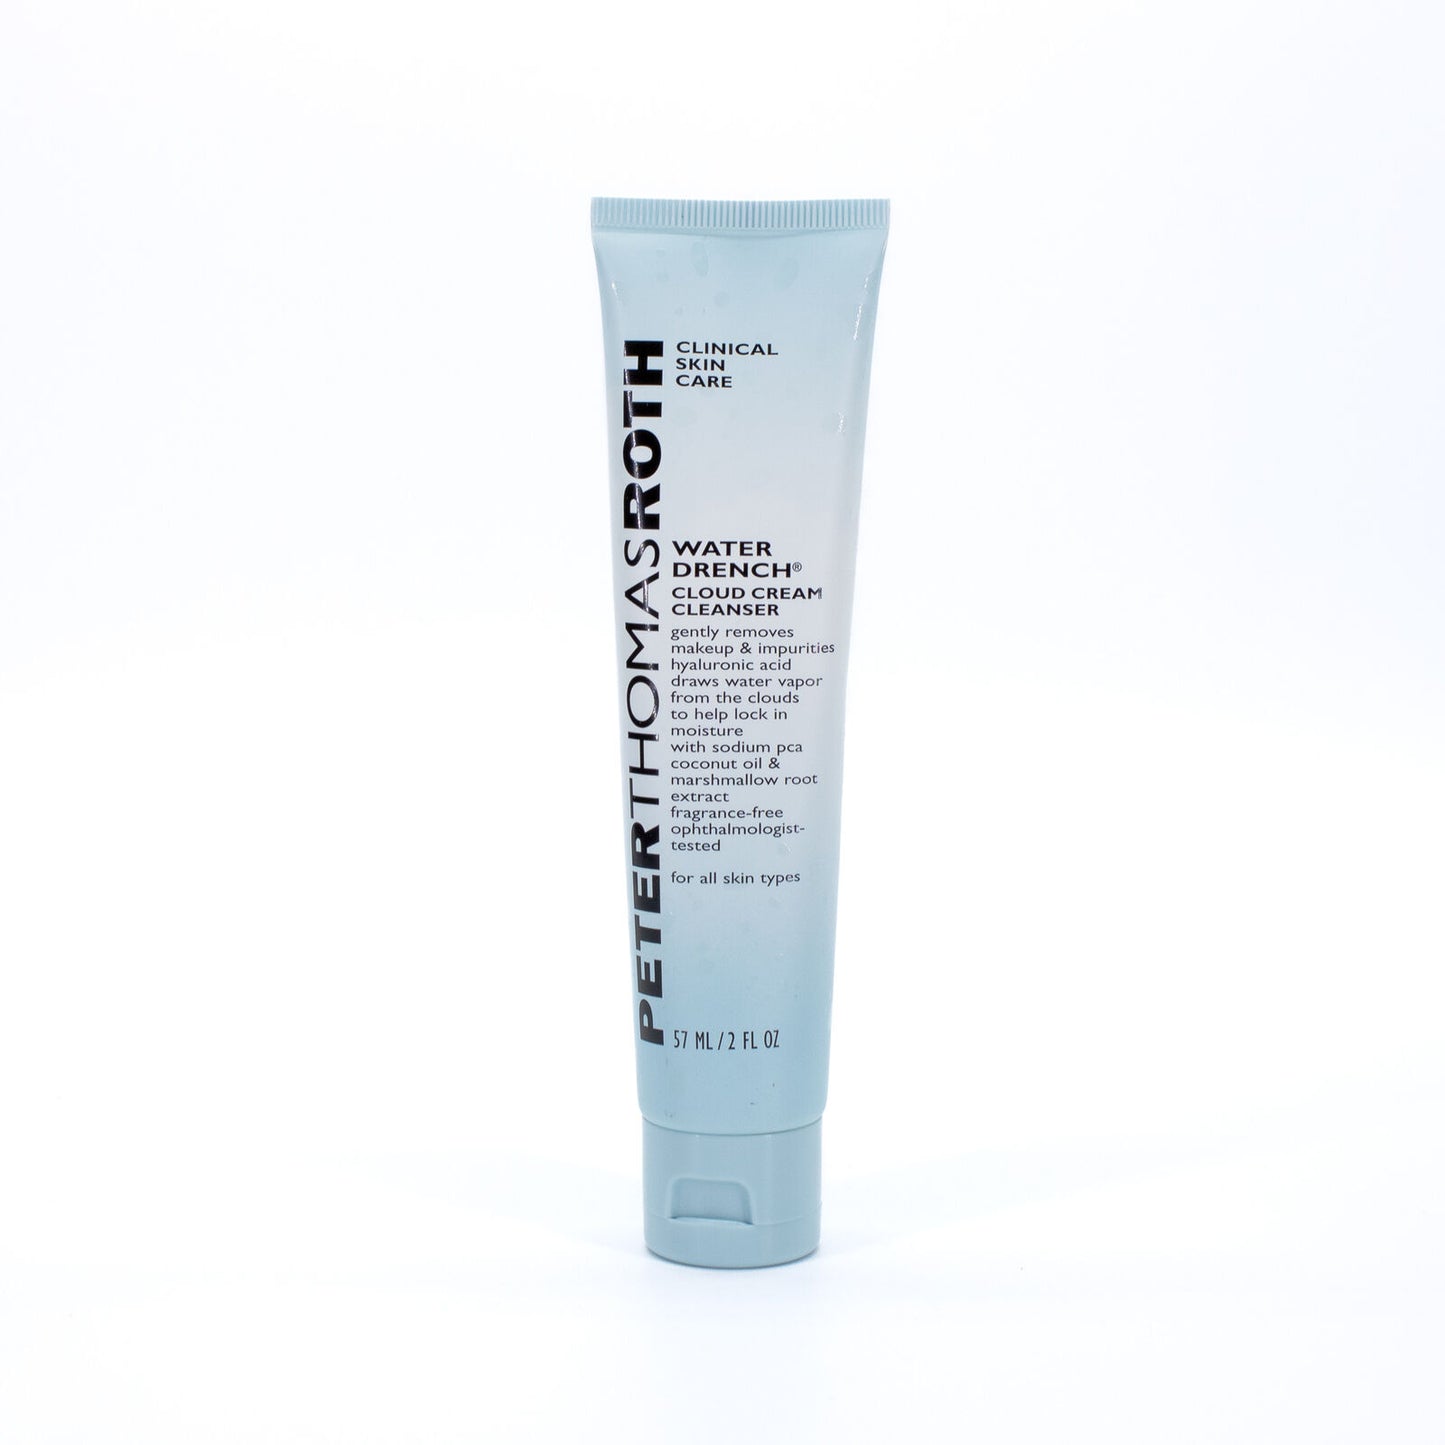 PETERTHOMASROTH Water Drench Cloud Cream Cleanser 2oz - Imperfect Box